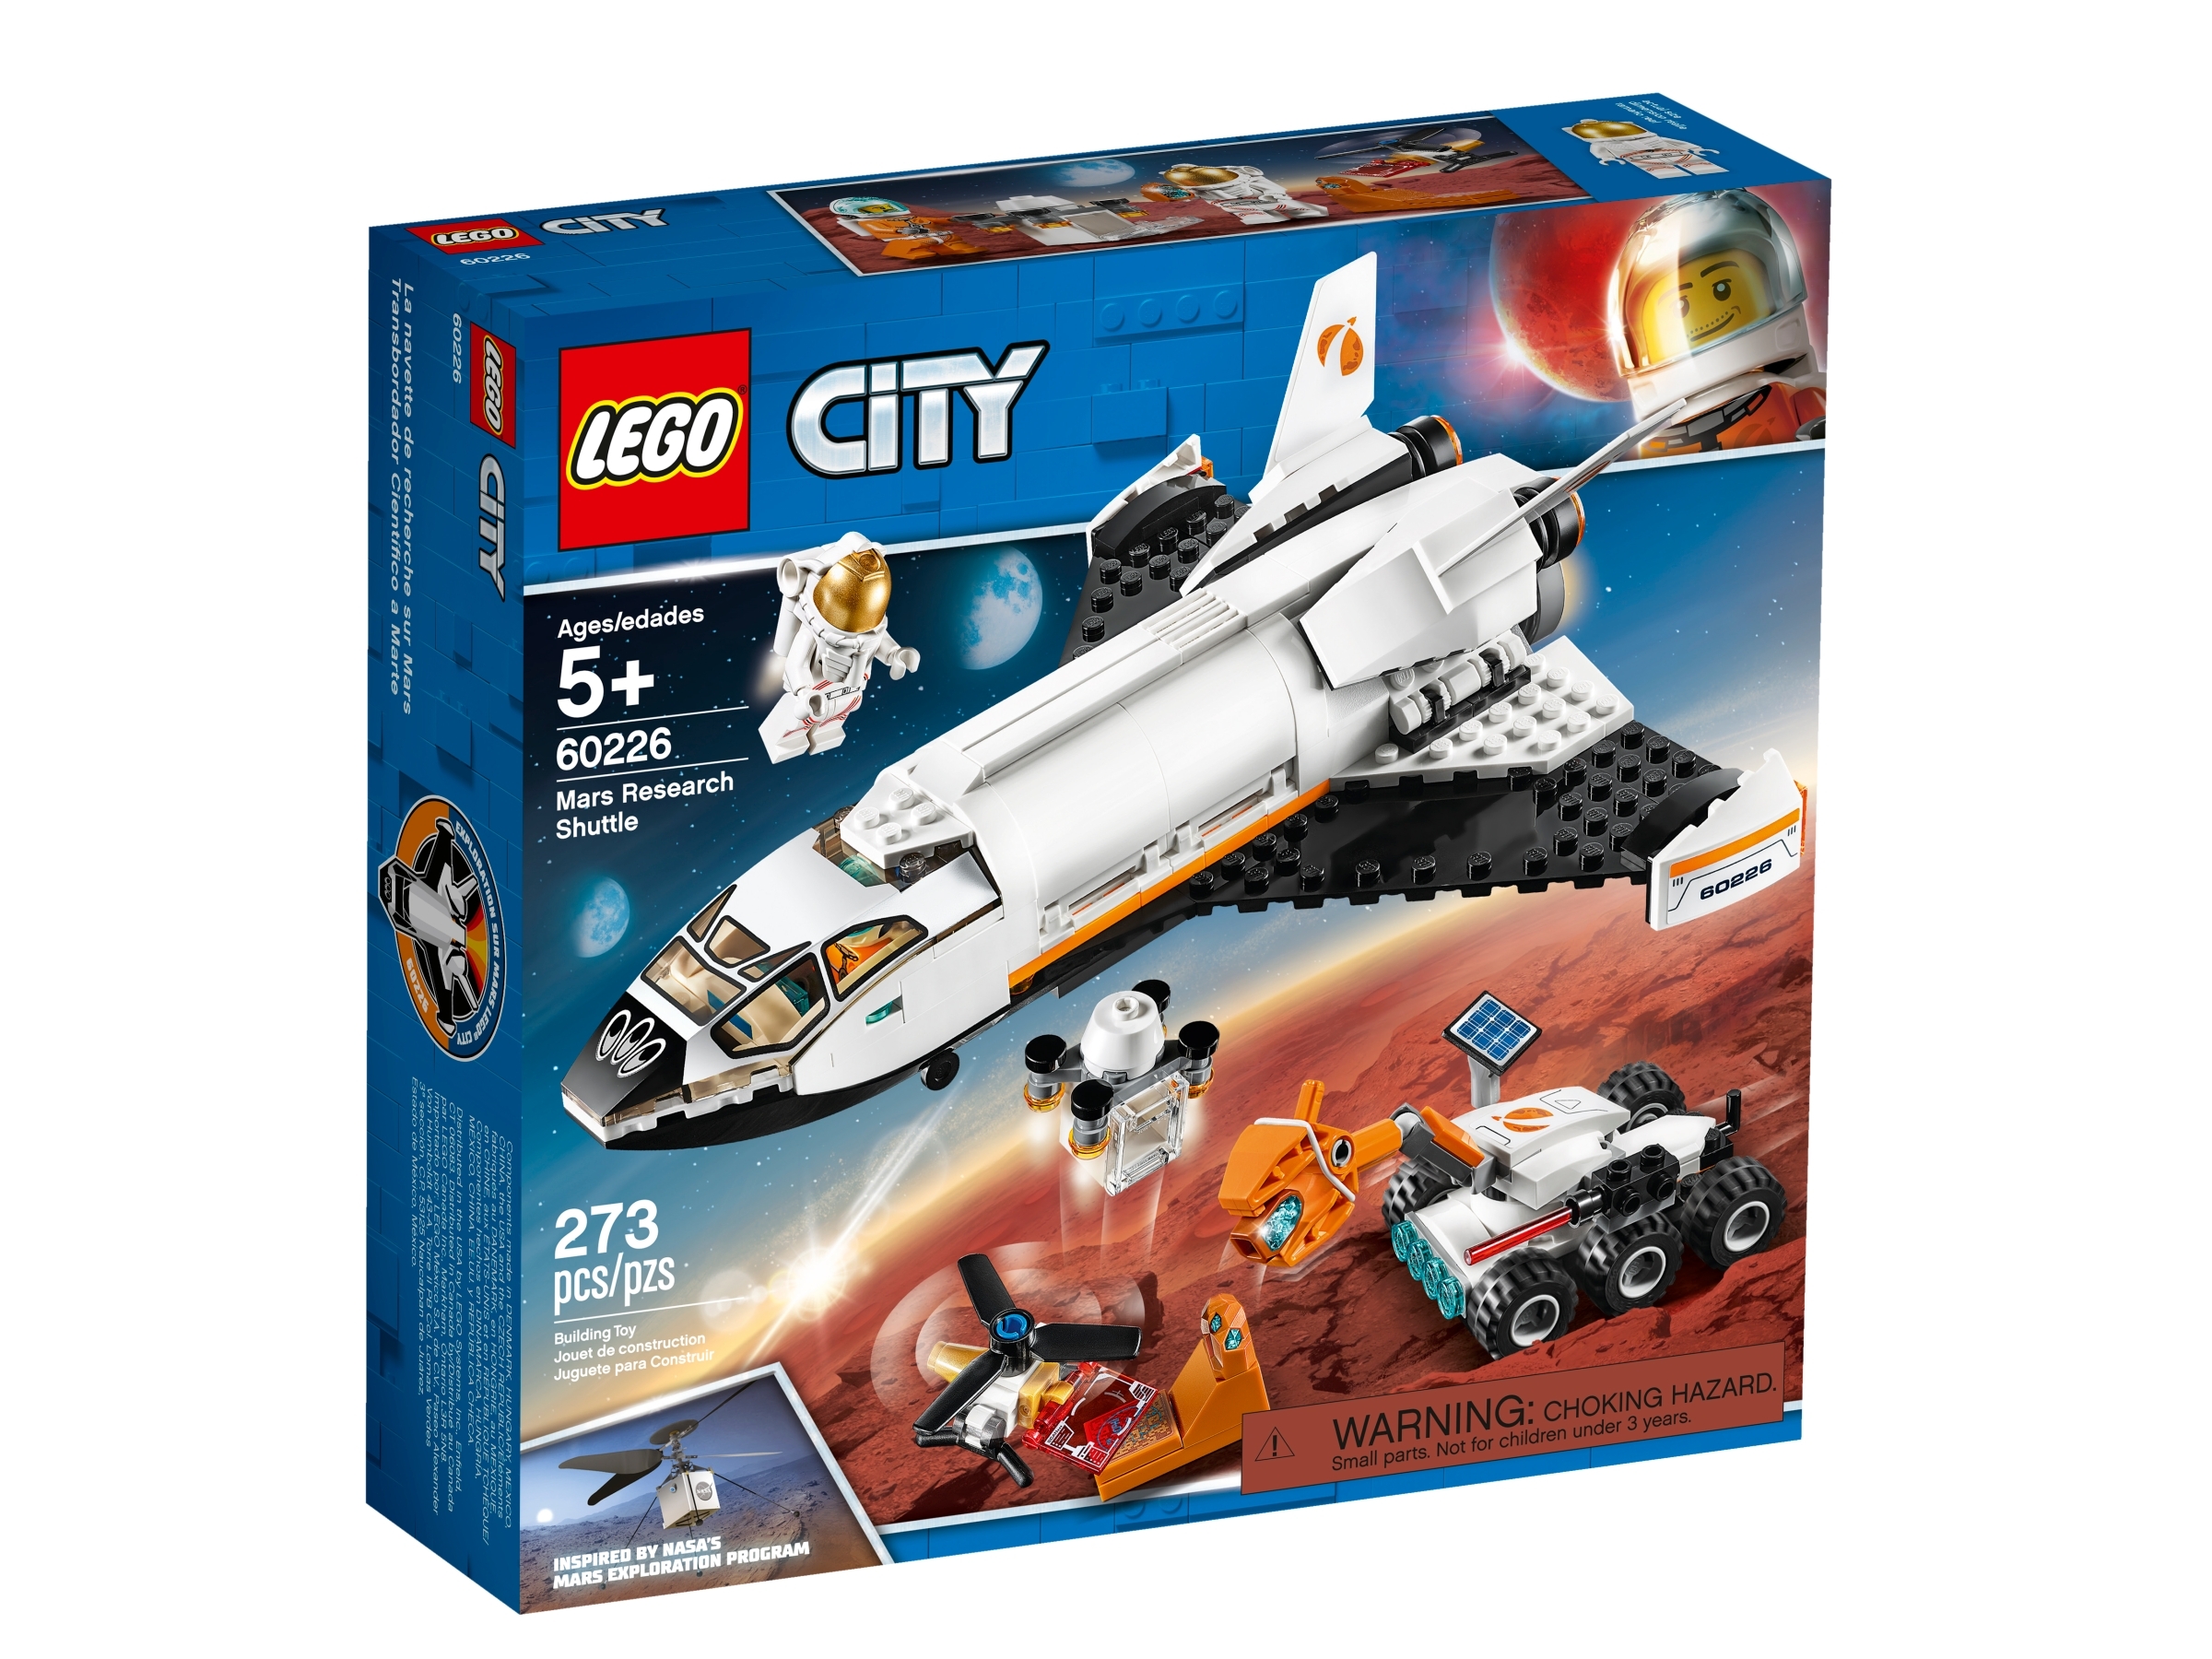 Mars Research Shuttle 60226 LEGO City for sale online